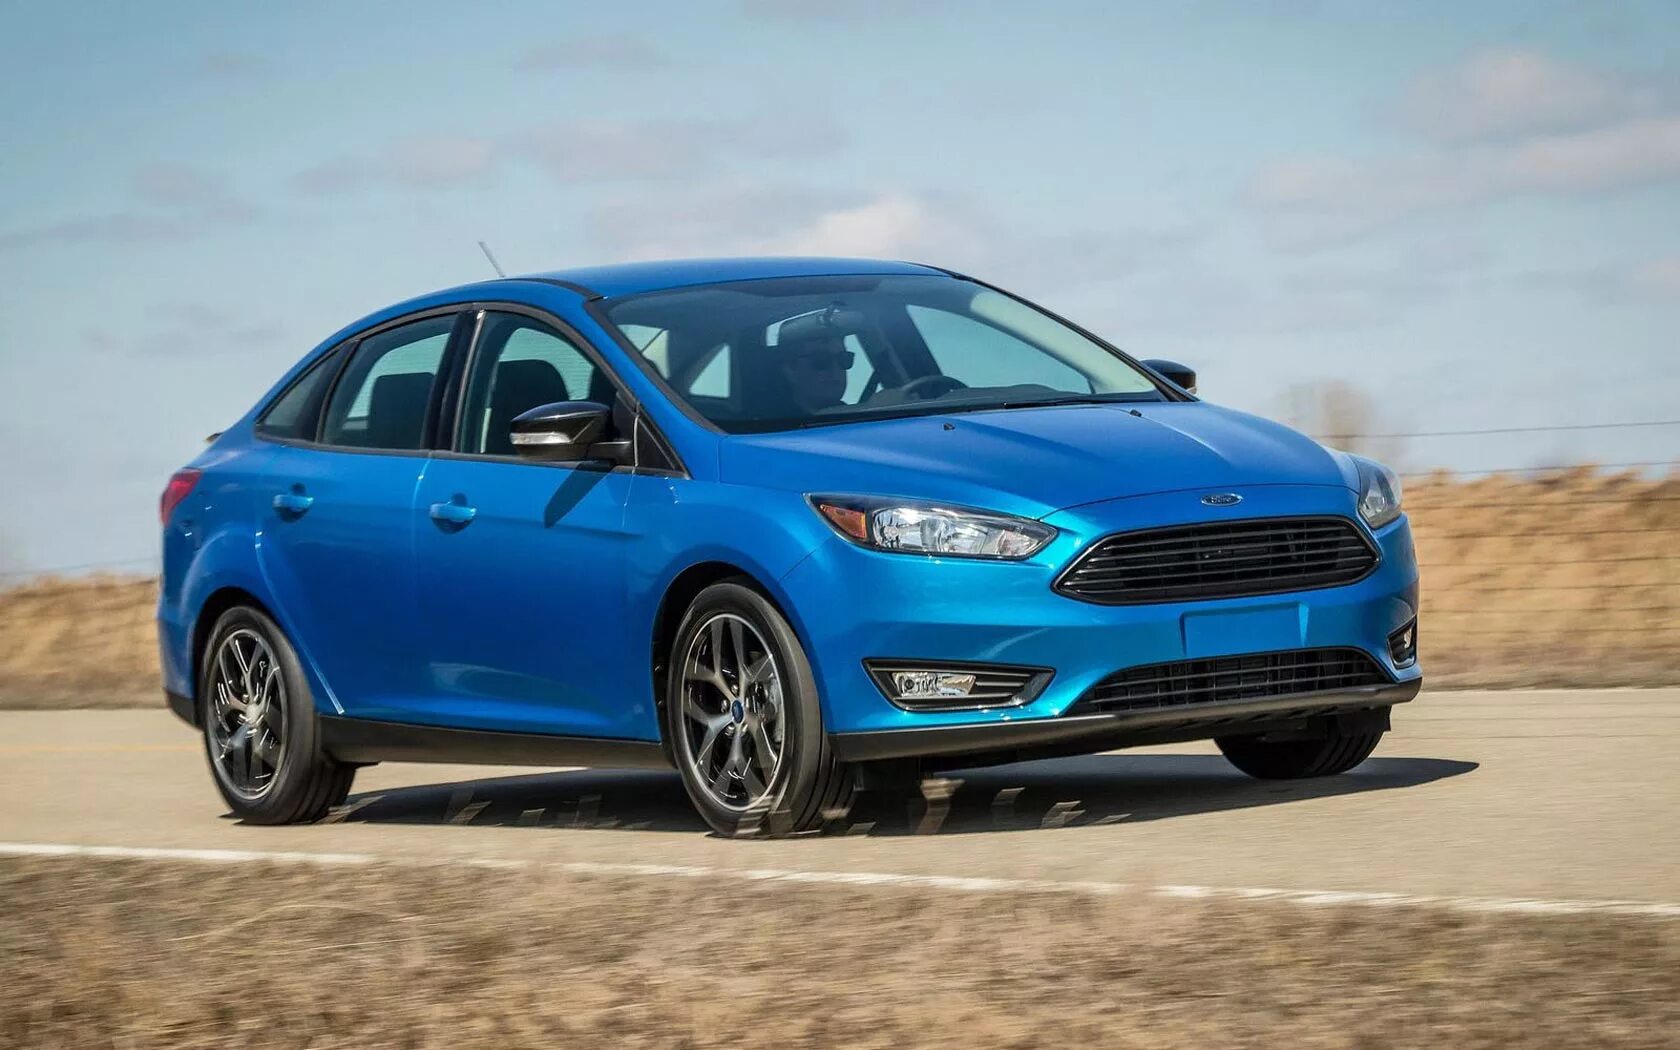 Ford Focus 2015 седан. Ford Focus 2016. Форд фокус 3 седан 2016. Форд фокус 2016 седан.